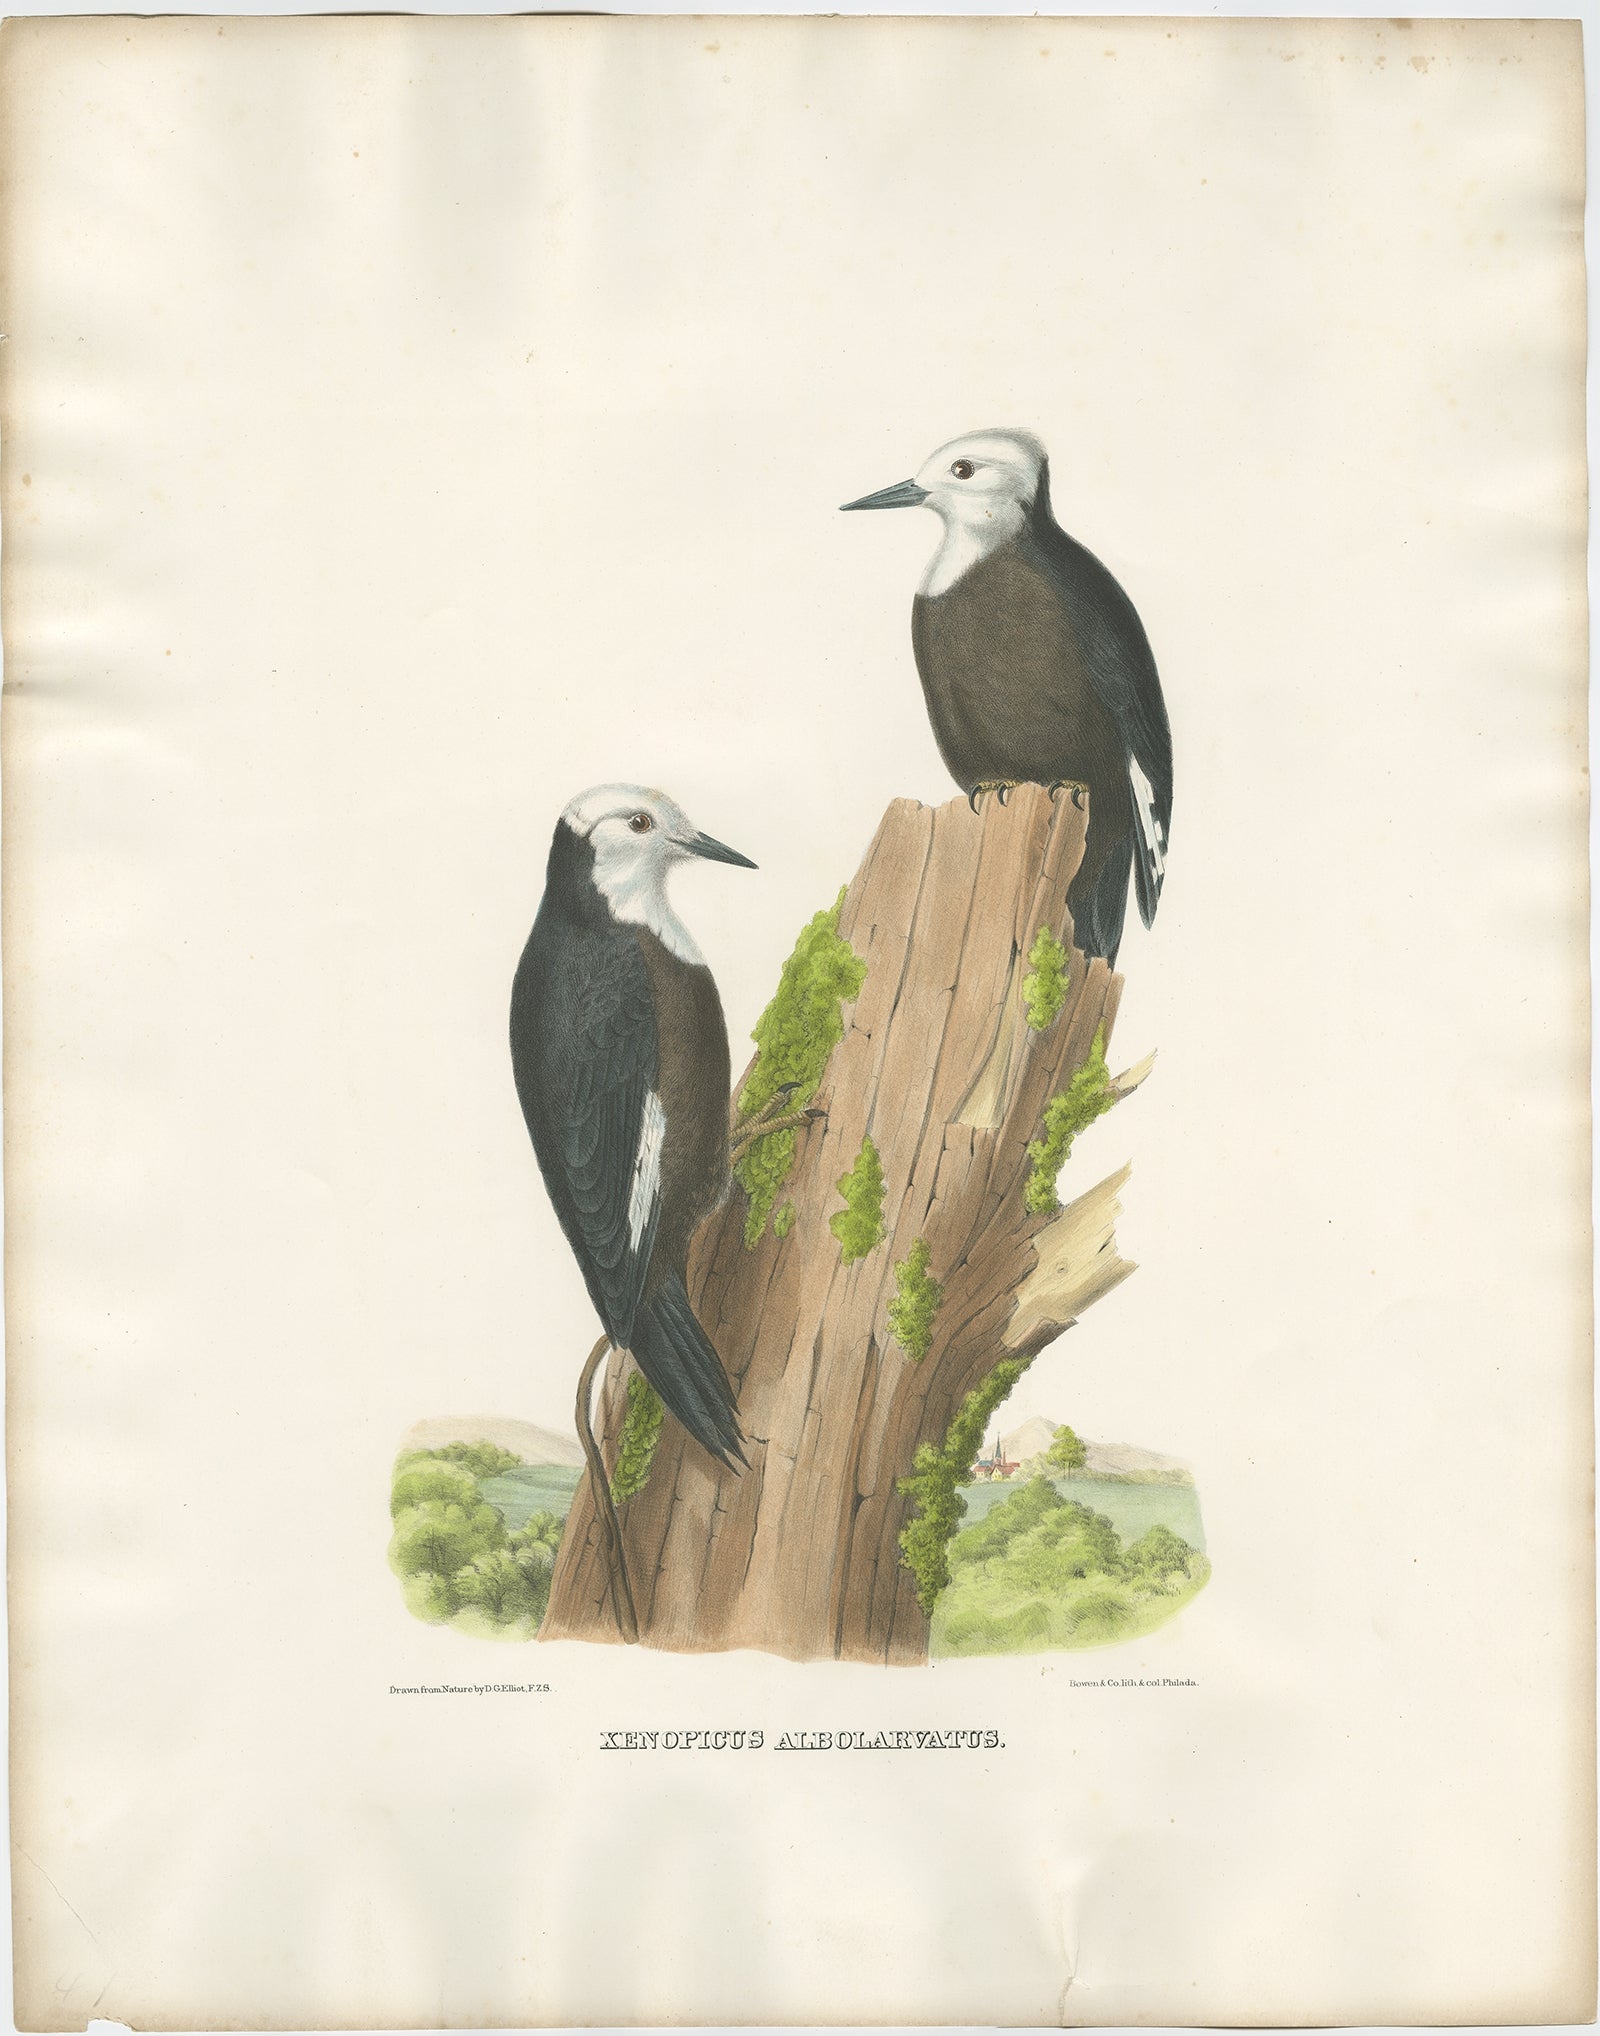 Antique bird print titled 'Xenopicus Albolarvatus'. 

Old bird print depicting two White-Headed Woodpeckers. This print originates from 'The new and heretofore unfigured species of the birds of North America', published 1866-1869.

This spectacular